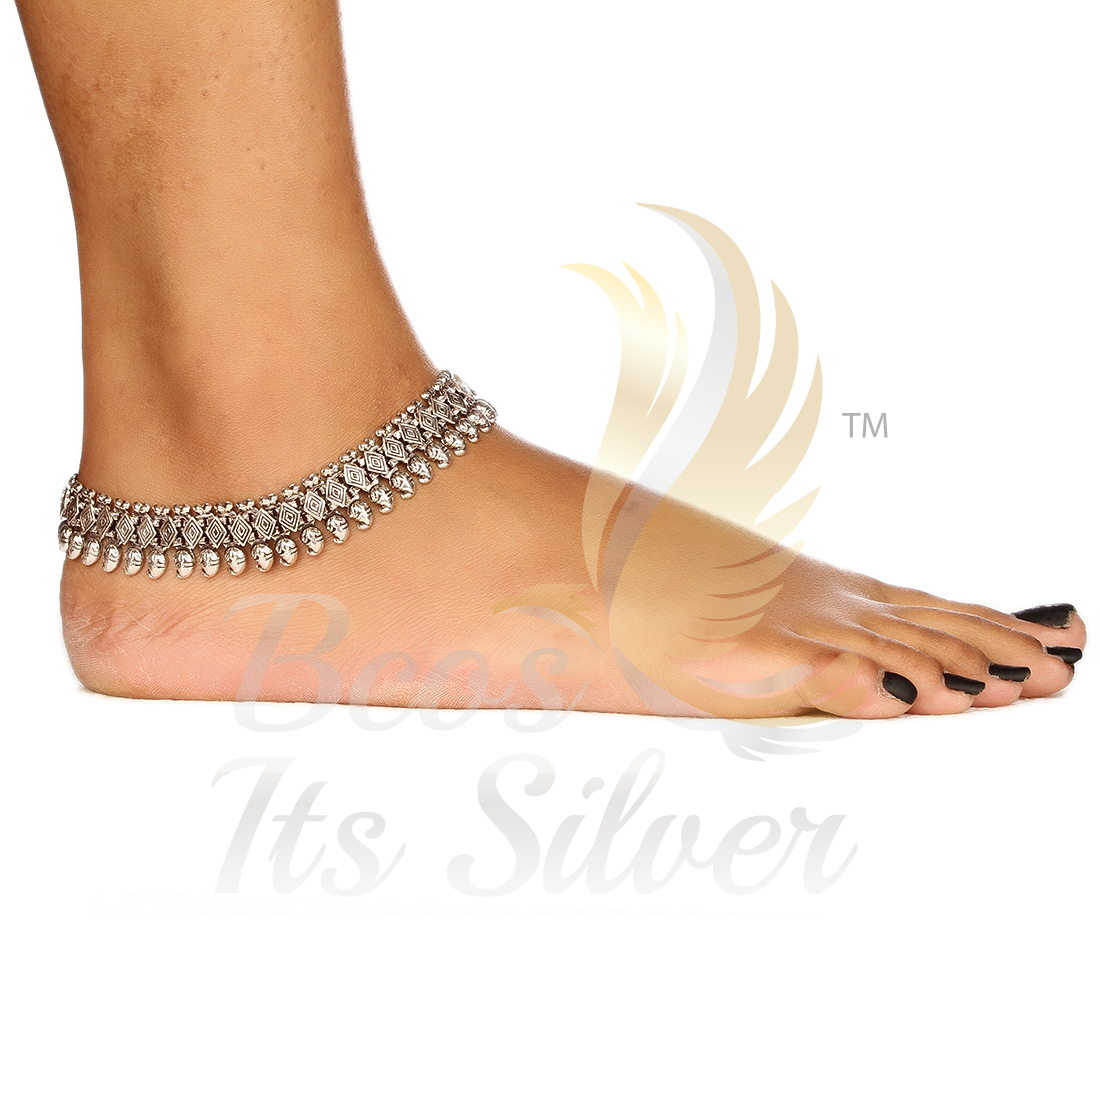 how to clean anklet at home